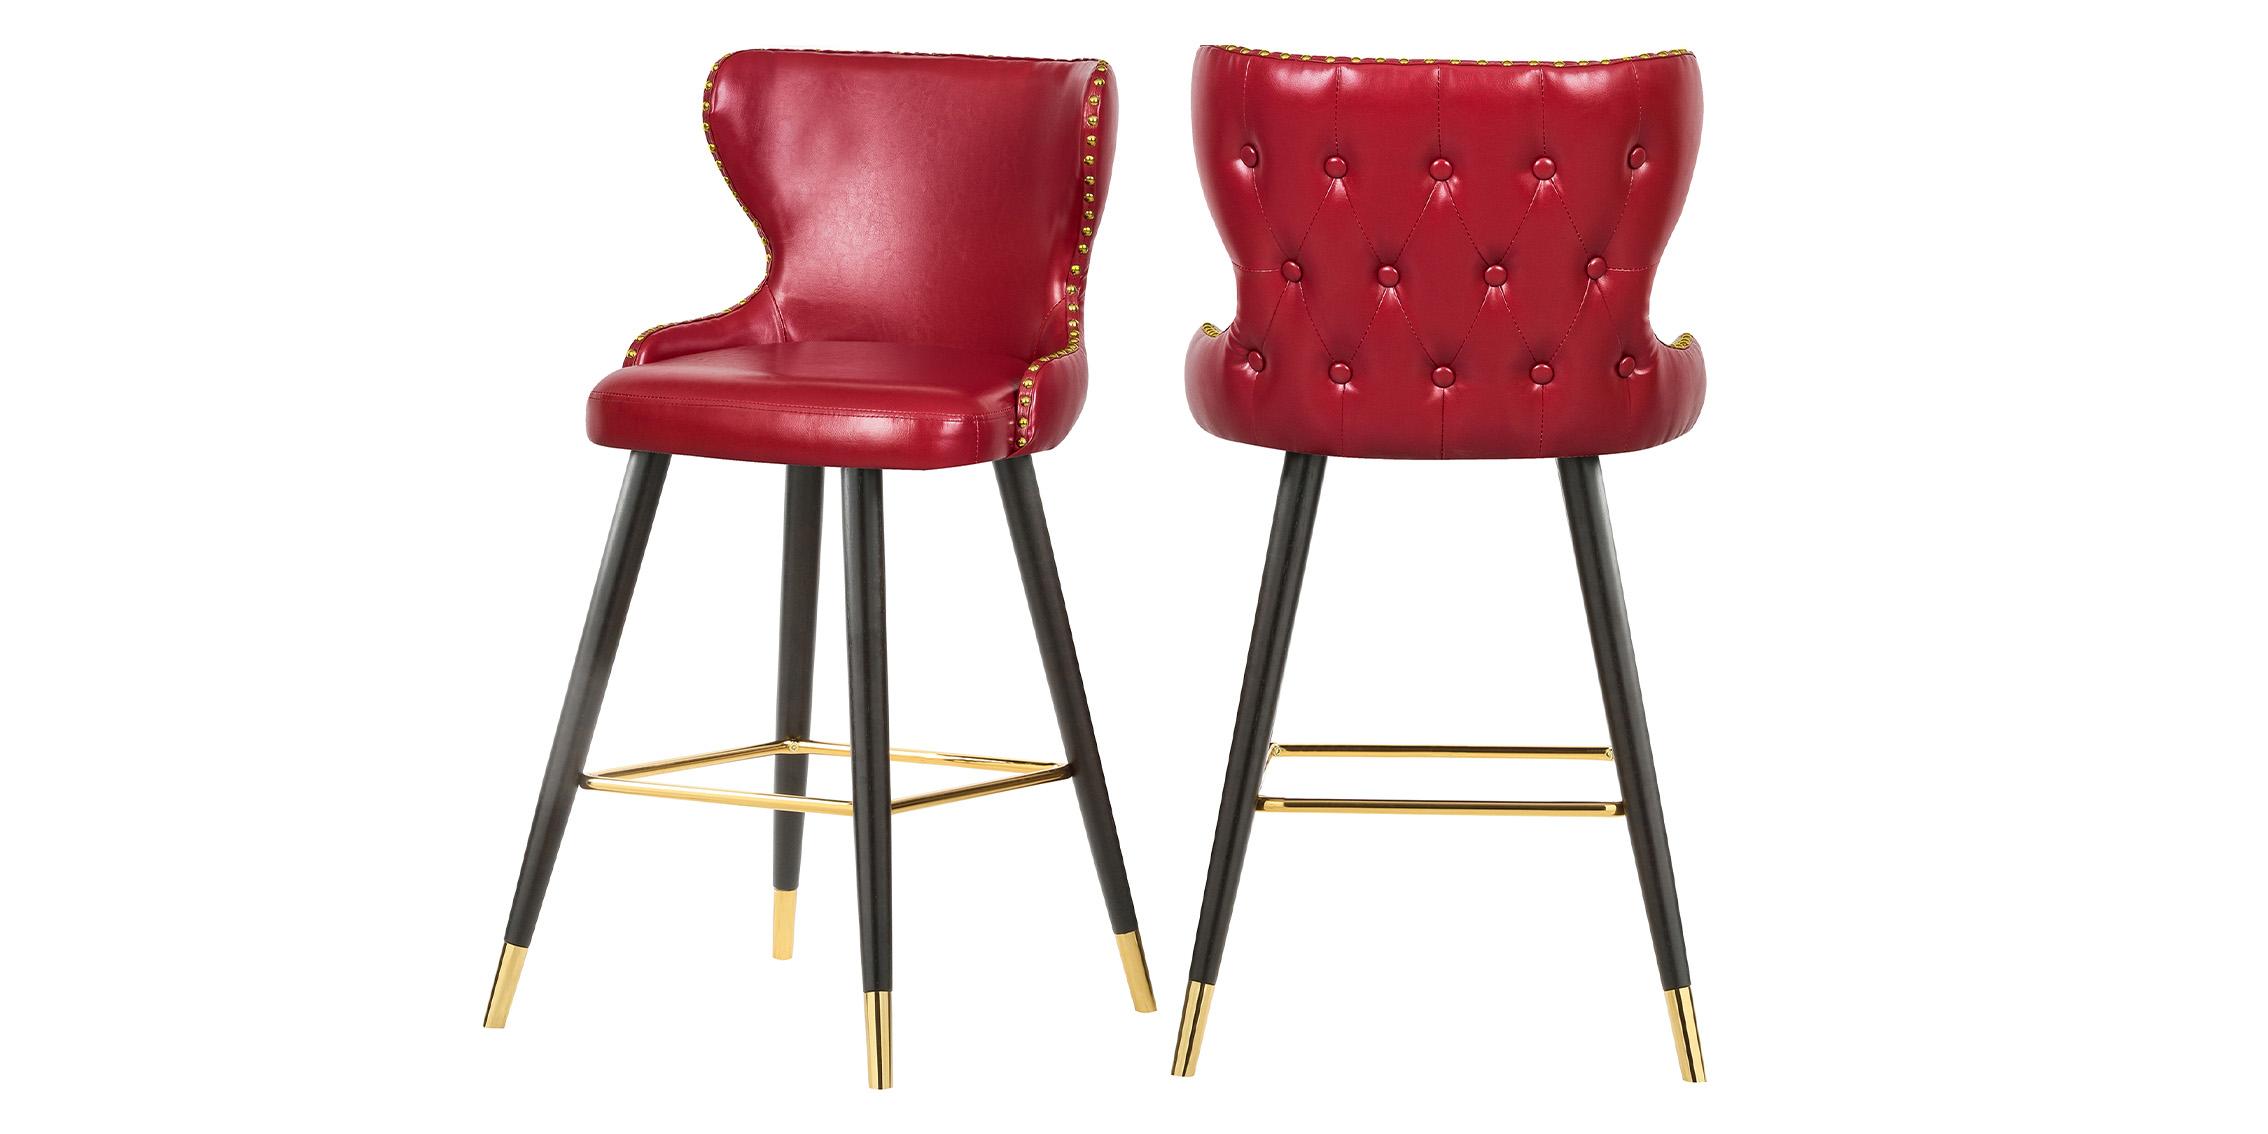 Contemporary, Modern Counter Stool Set HENDRIX 962Red-C 962Red-C in Red Faux Leather